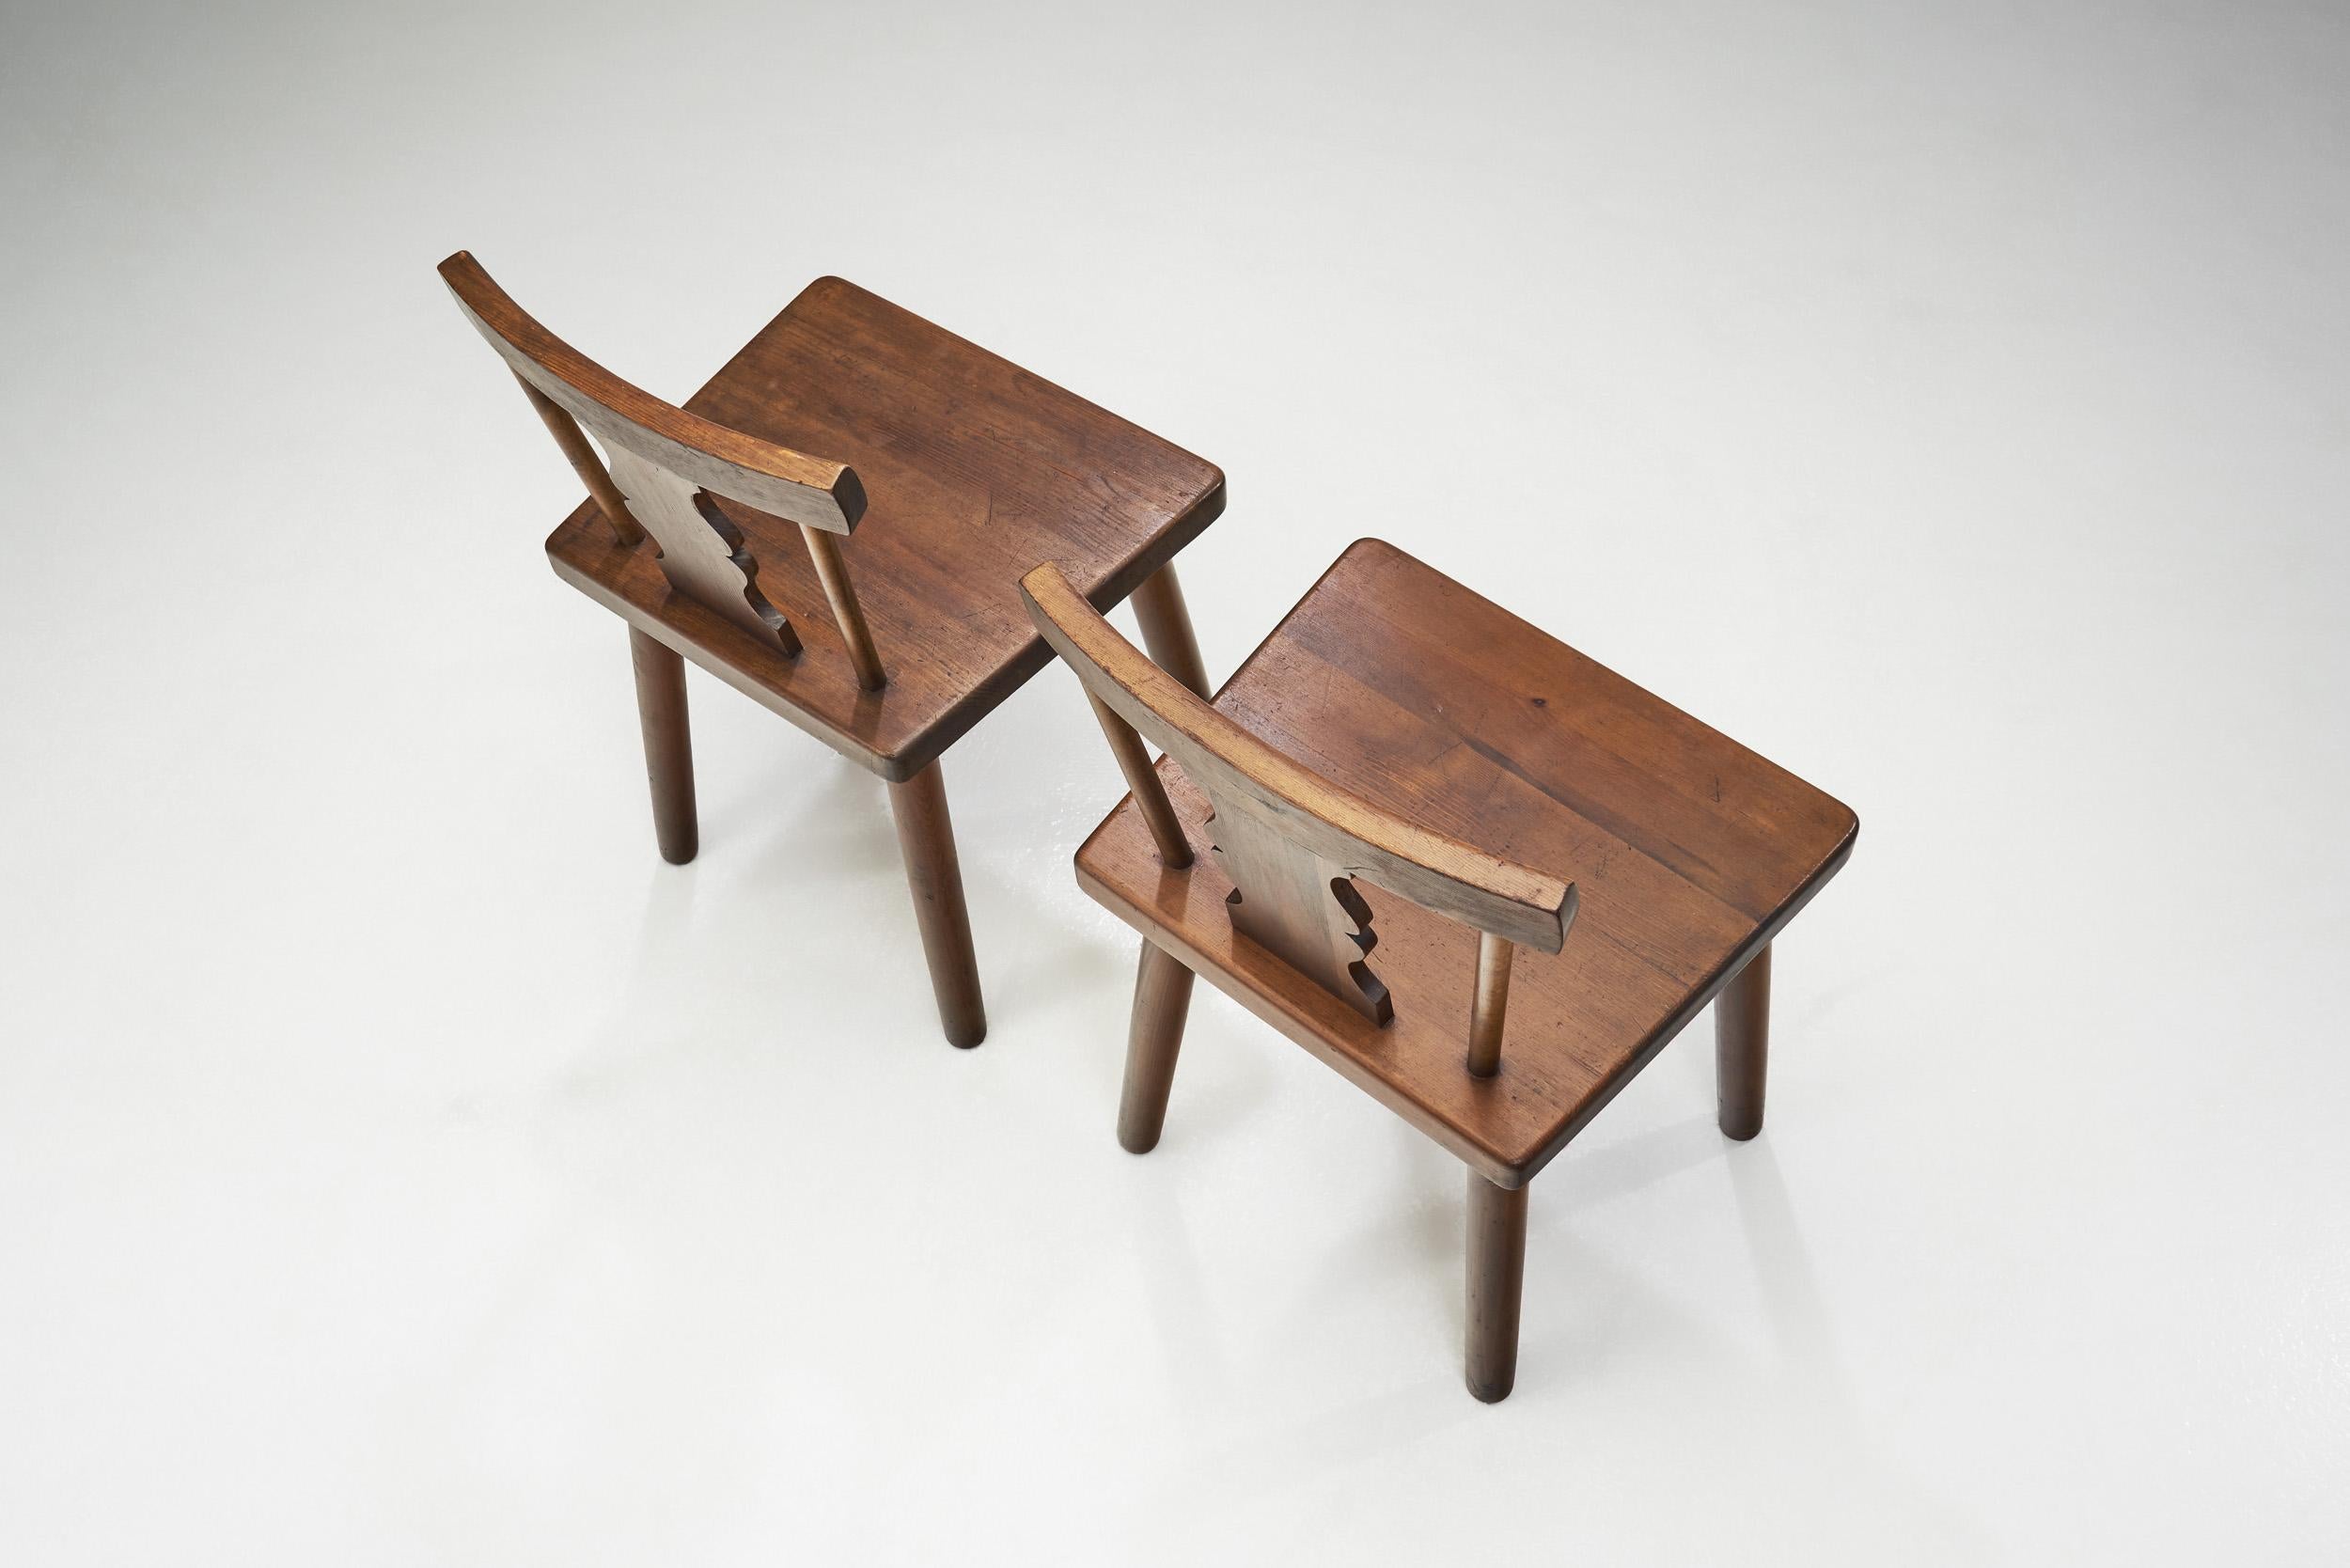 20th Century Rustic Solid Pine Chairs with Carved Backs, Europe early 20th century For Sale